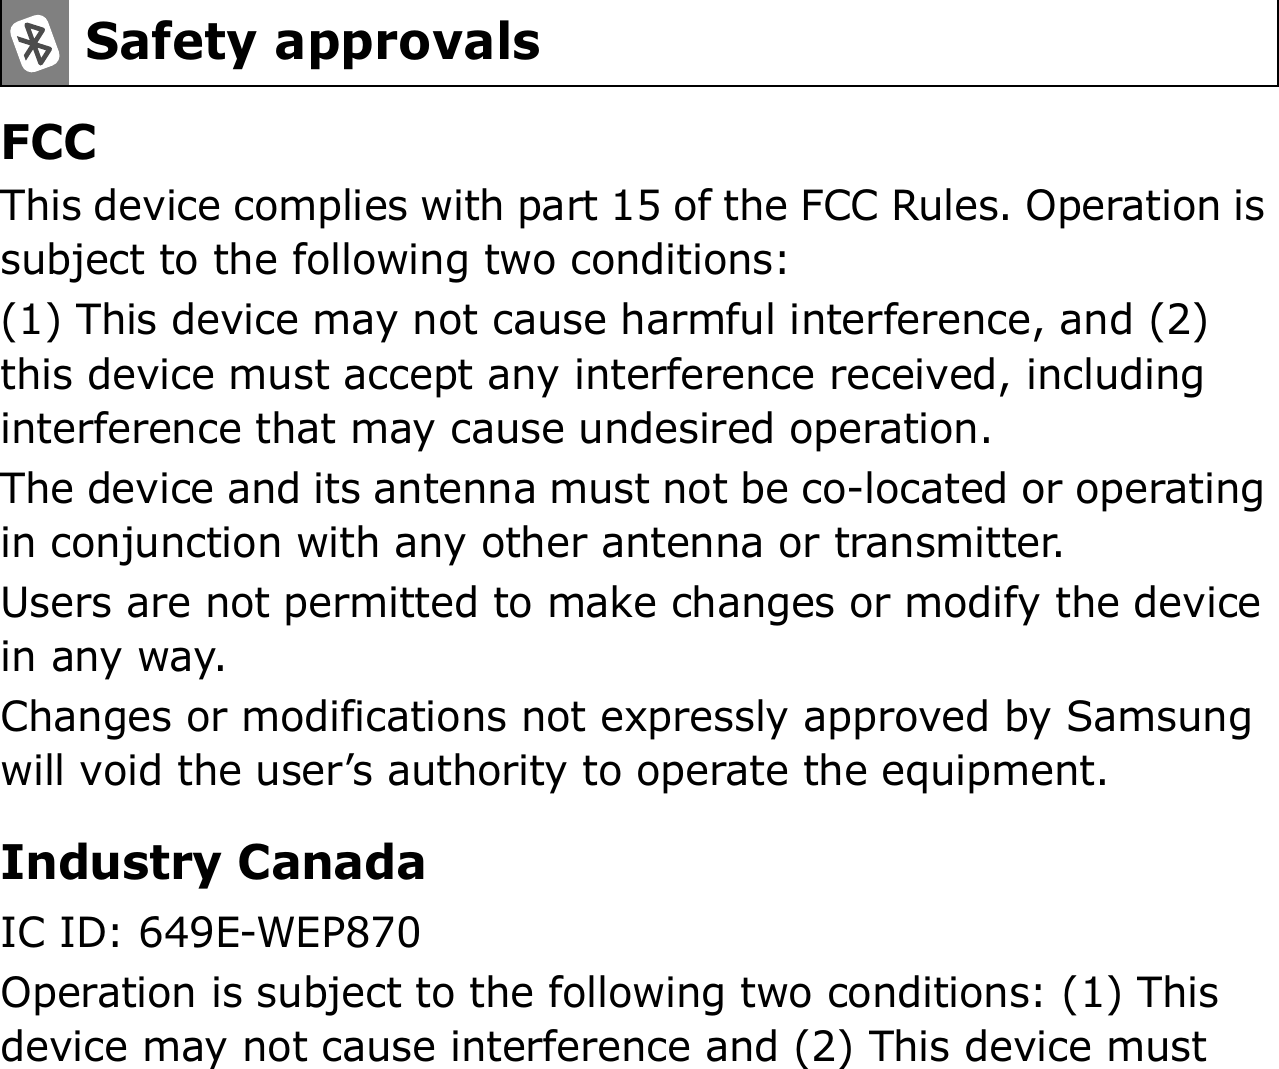 FCCThis device complies with part 15 of the FCC Rules. Operation is subject to the following two conditions:(1) This device may not cause harmful interference, and (2) this device must accept any interference received, including interference that may cause undesired operation.The device and its antenna must not be co-located or operating in conjunction with any other antenna or transmitter.Users are not permitted to make changes or modify the device in any way. Changes or modifications not expressly approved by Samsung will void the user’s authority to operate the equipment.Industry CanadaIC ID: 649E-WEP870Operation is subject to the following two conditions: (1) This device may not cause interference and (2) This device must Safety approvals